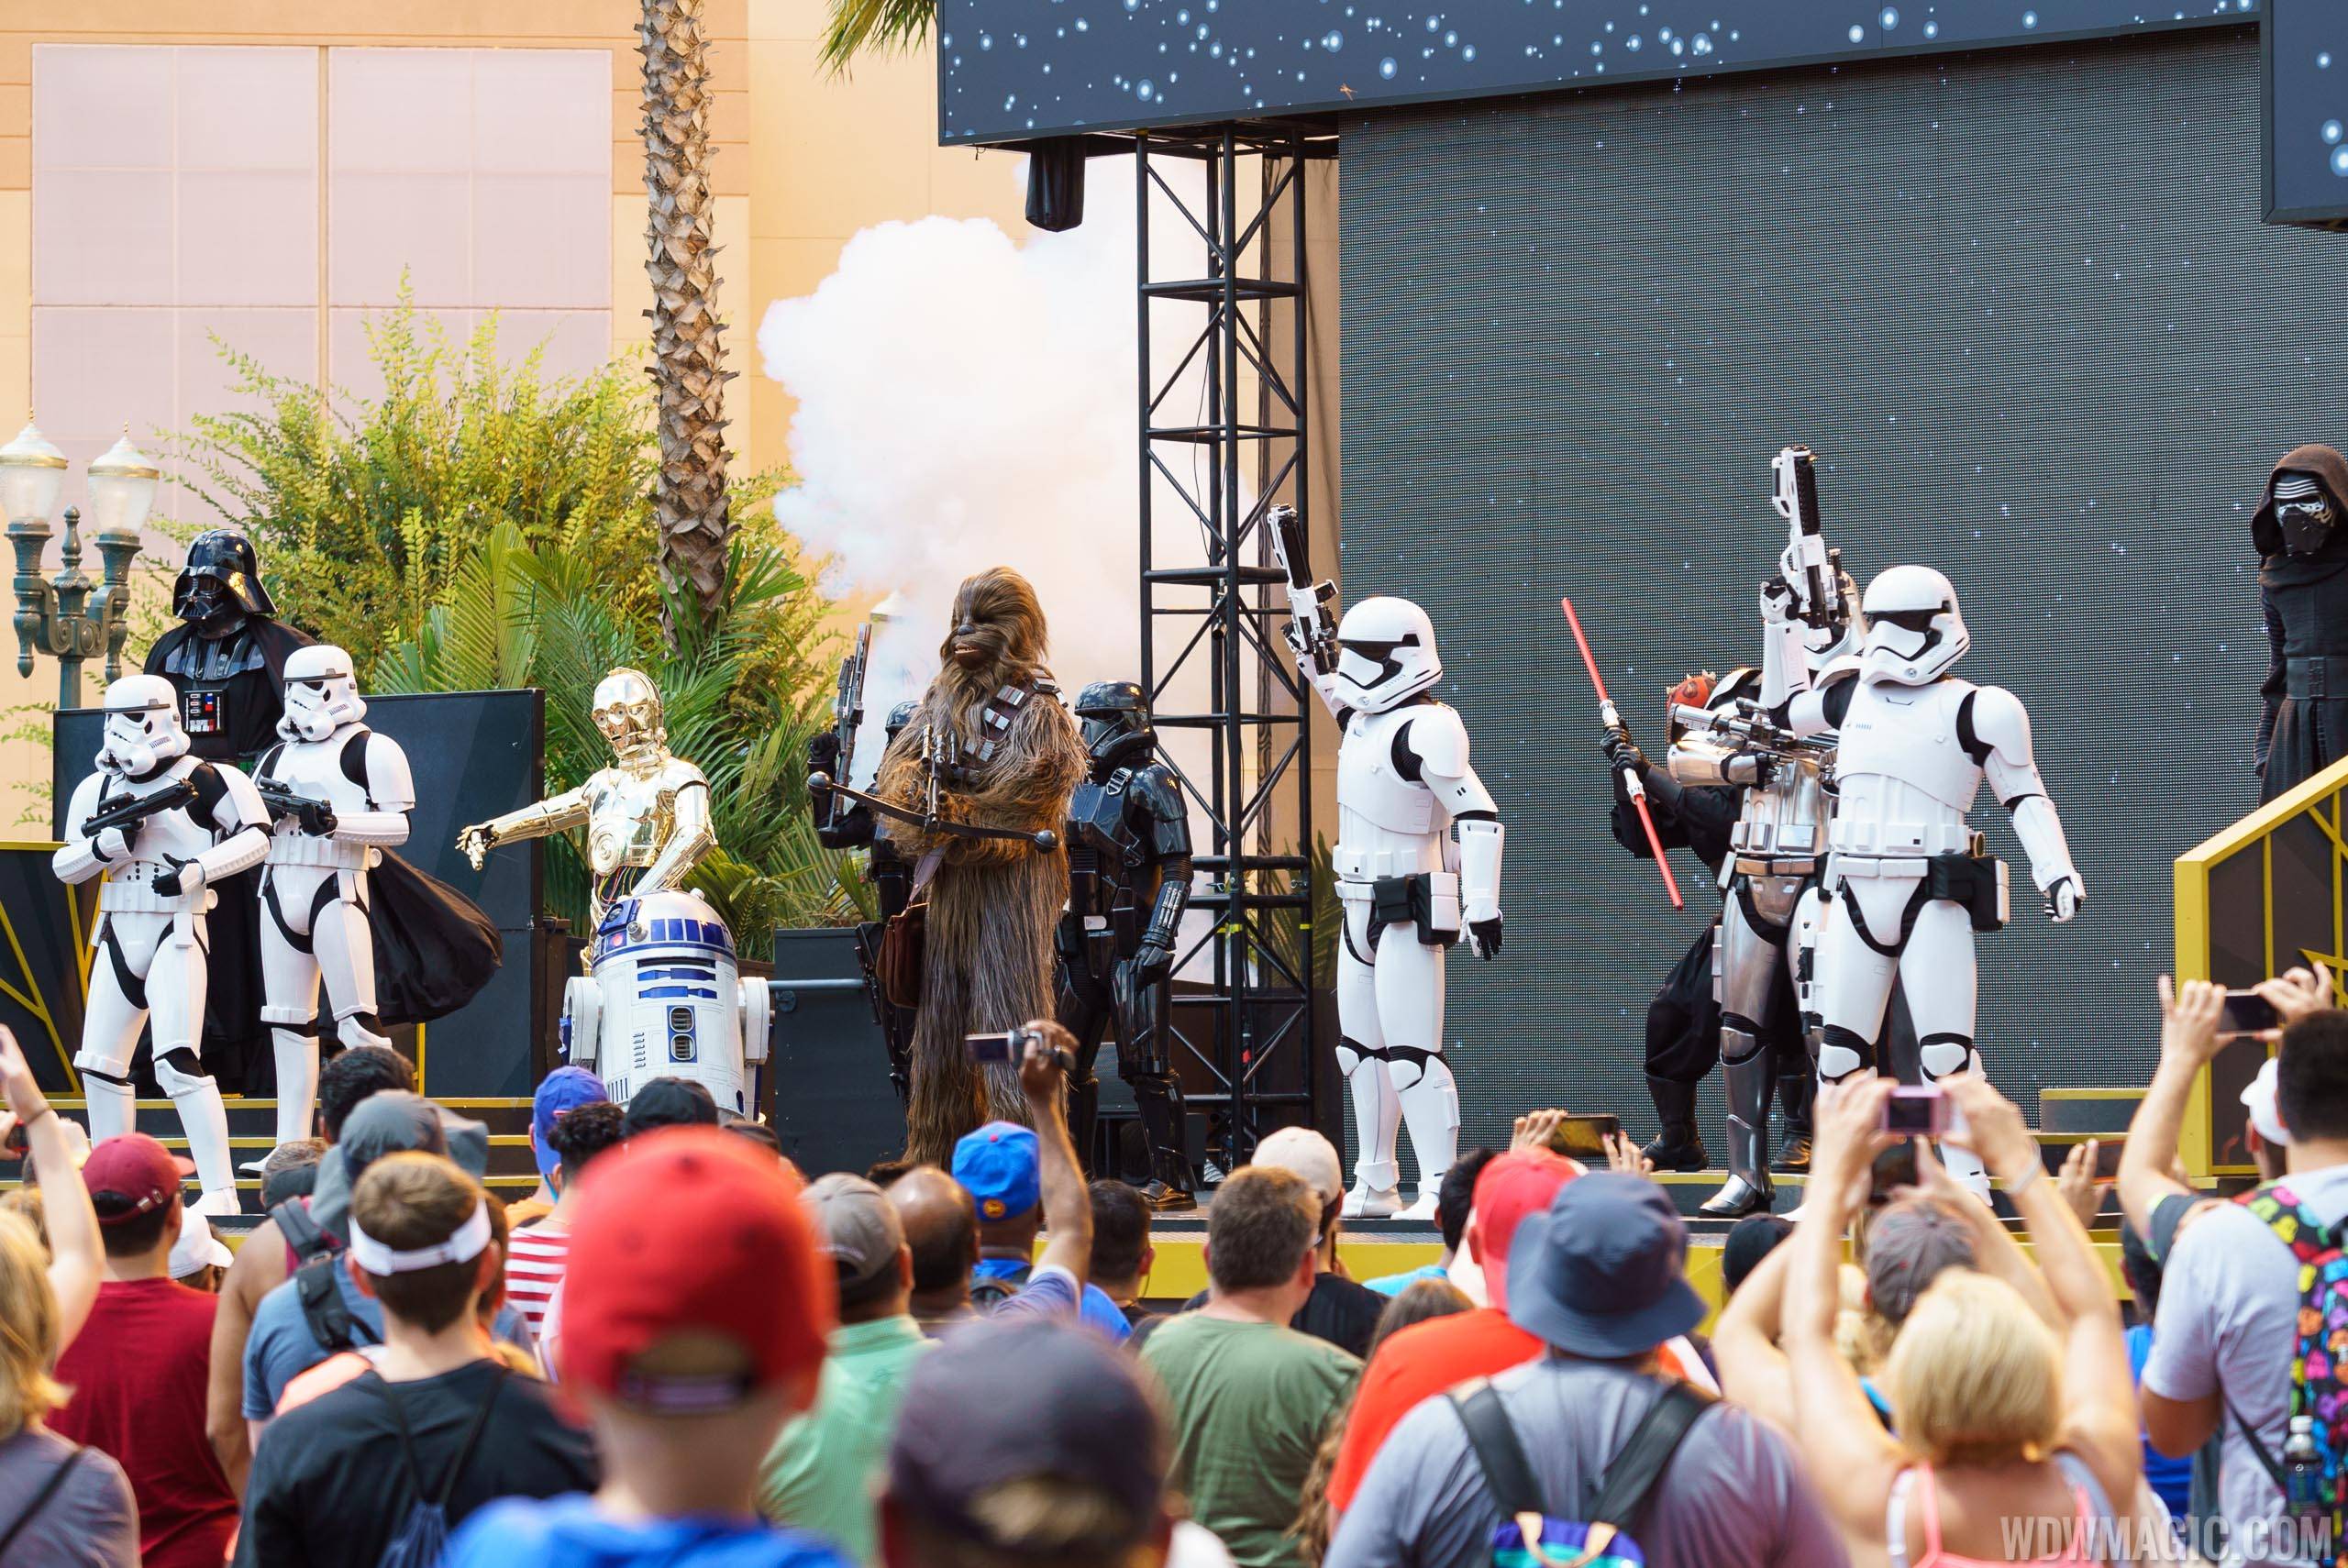 'Star Wars A Galaxy Far, Far Away' stage show and some meet and greets to end alongside entertainment shift to Galaxy's Edge?